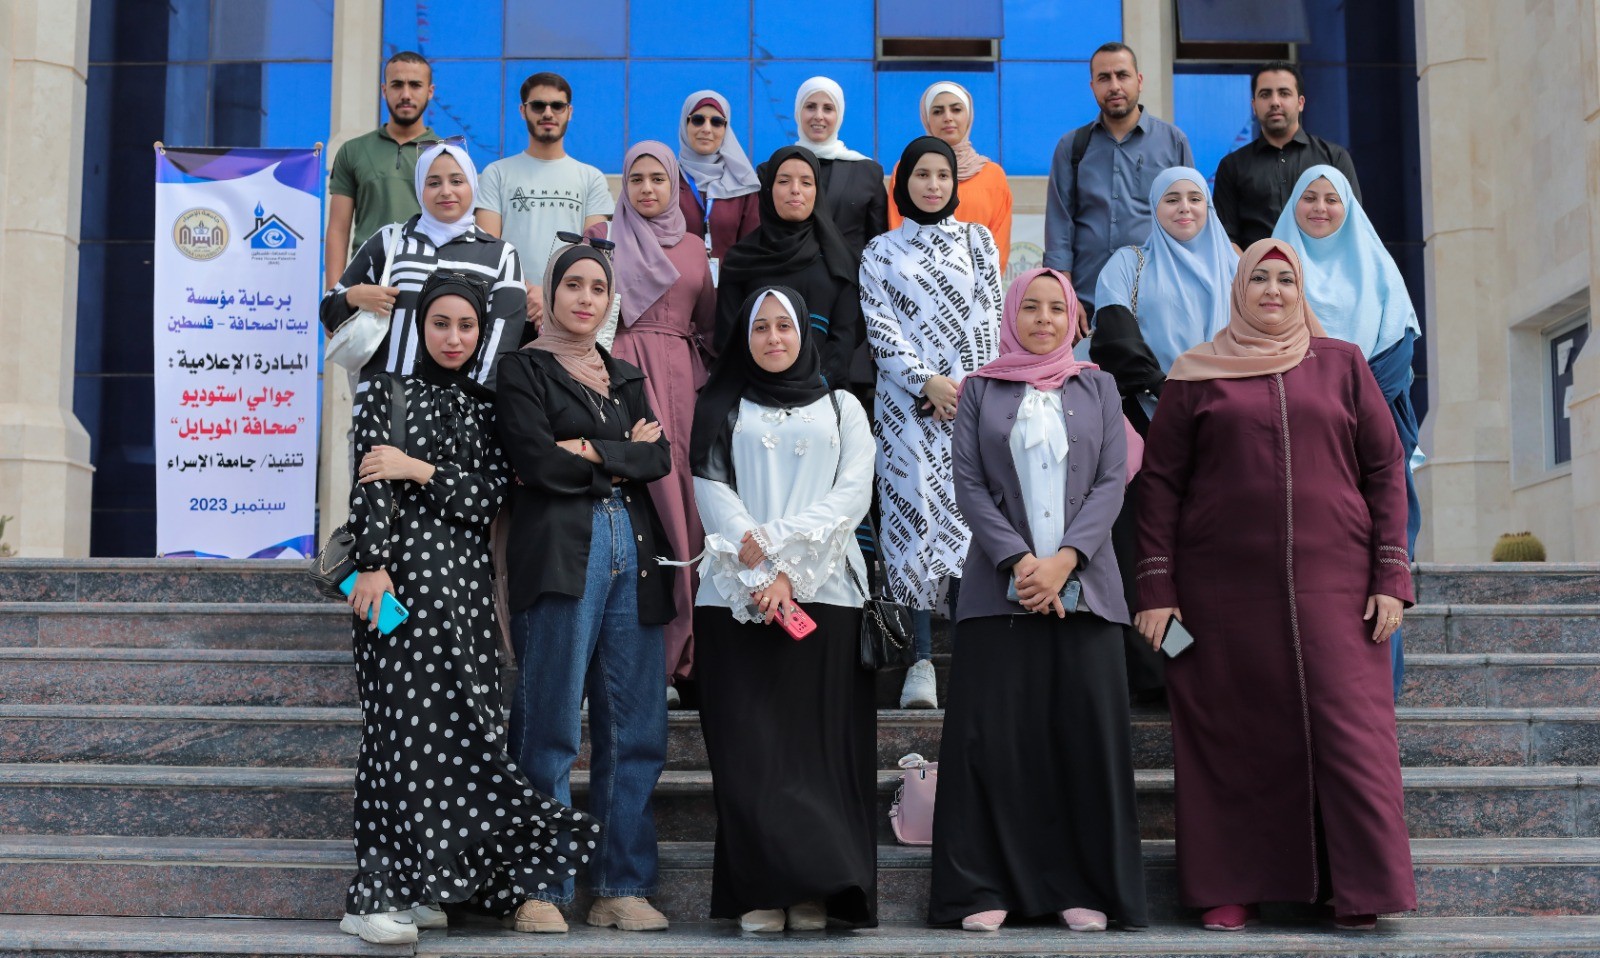 Sponsored by Press House: Israa University concludes the Mobile Journalism Initiative